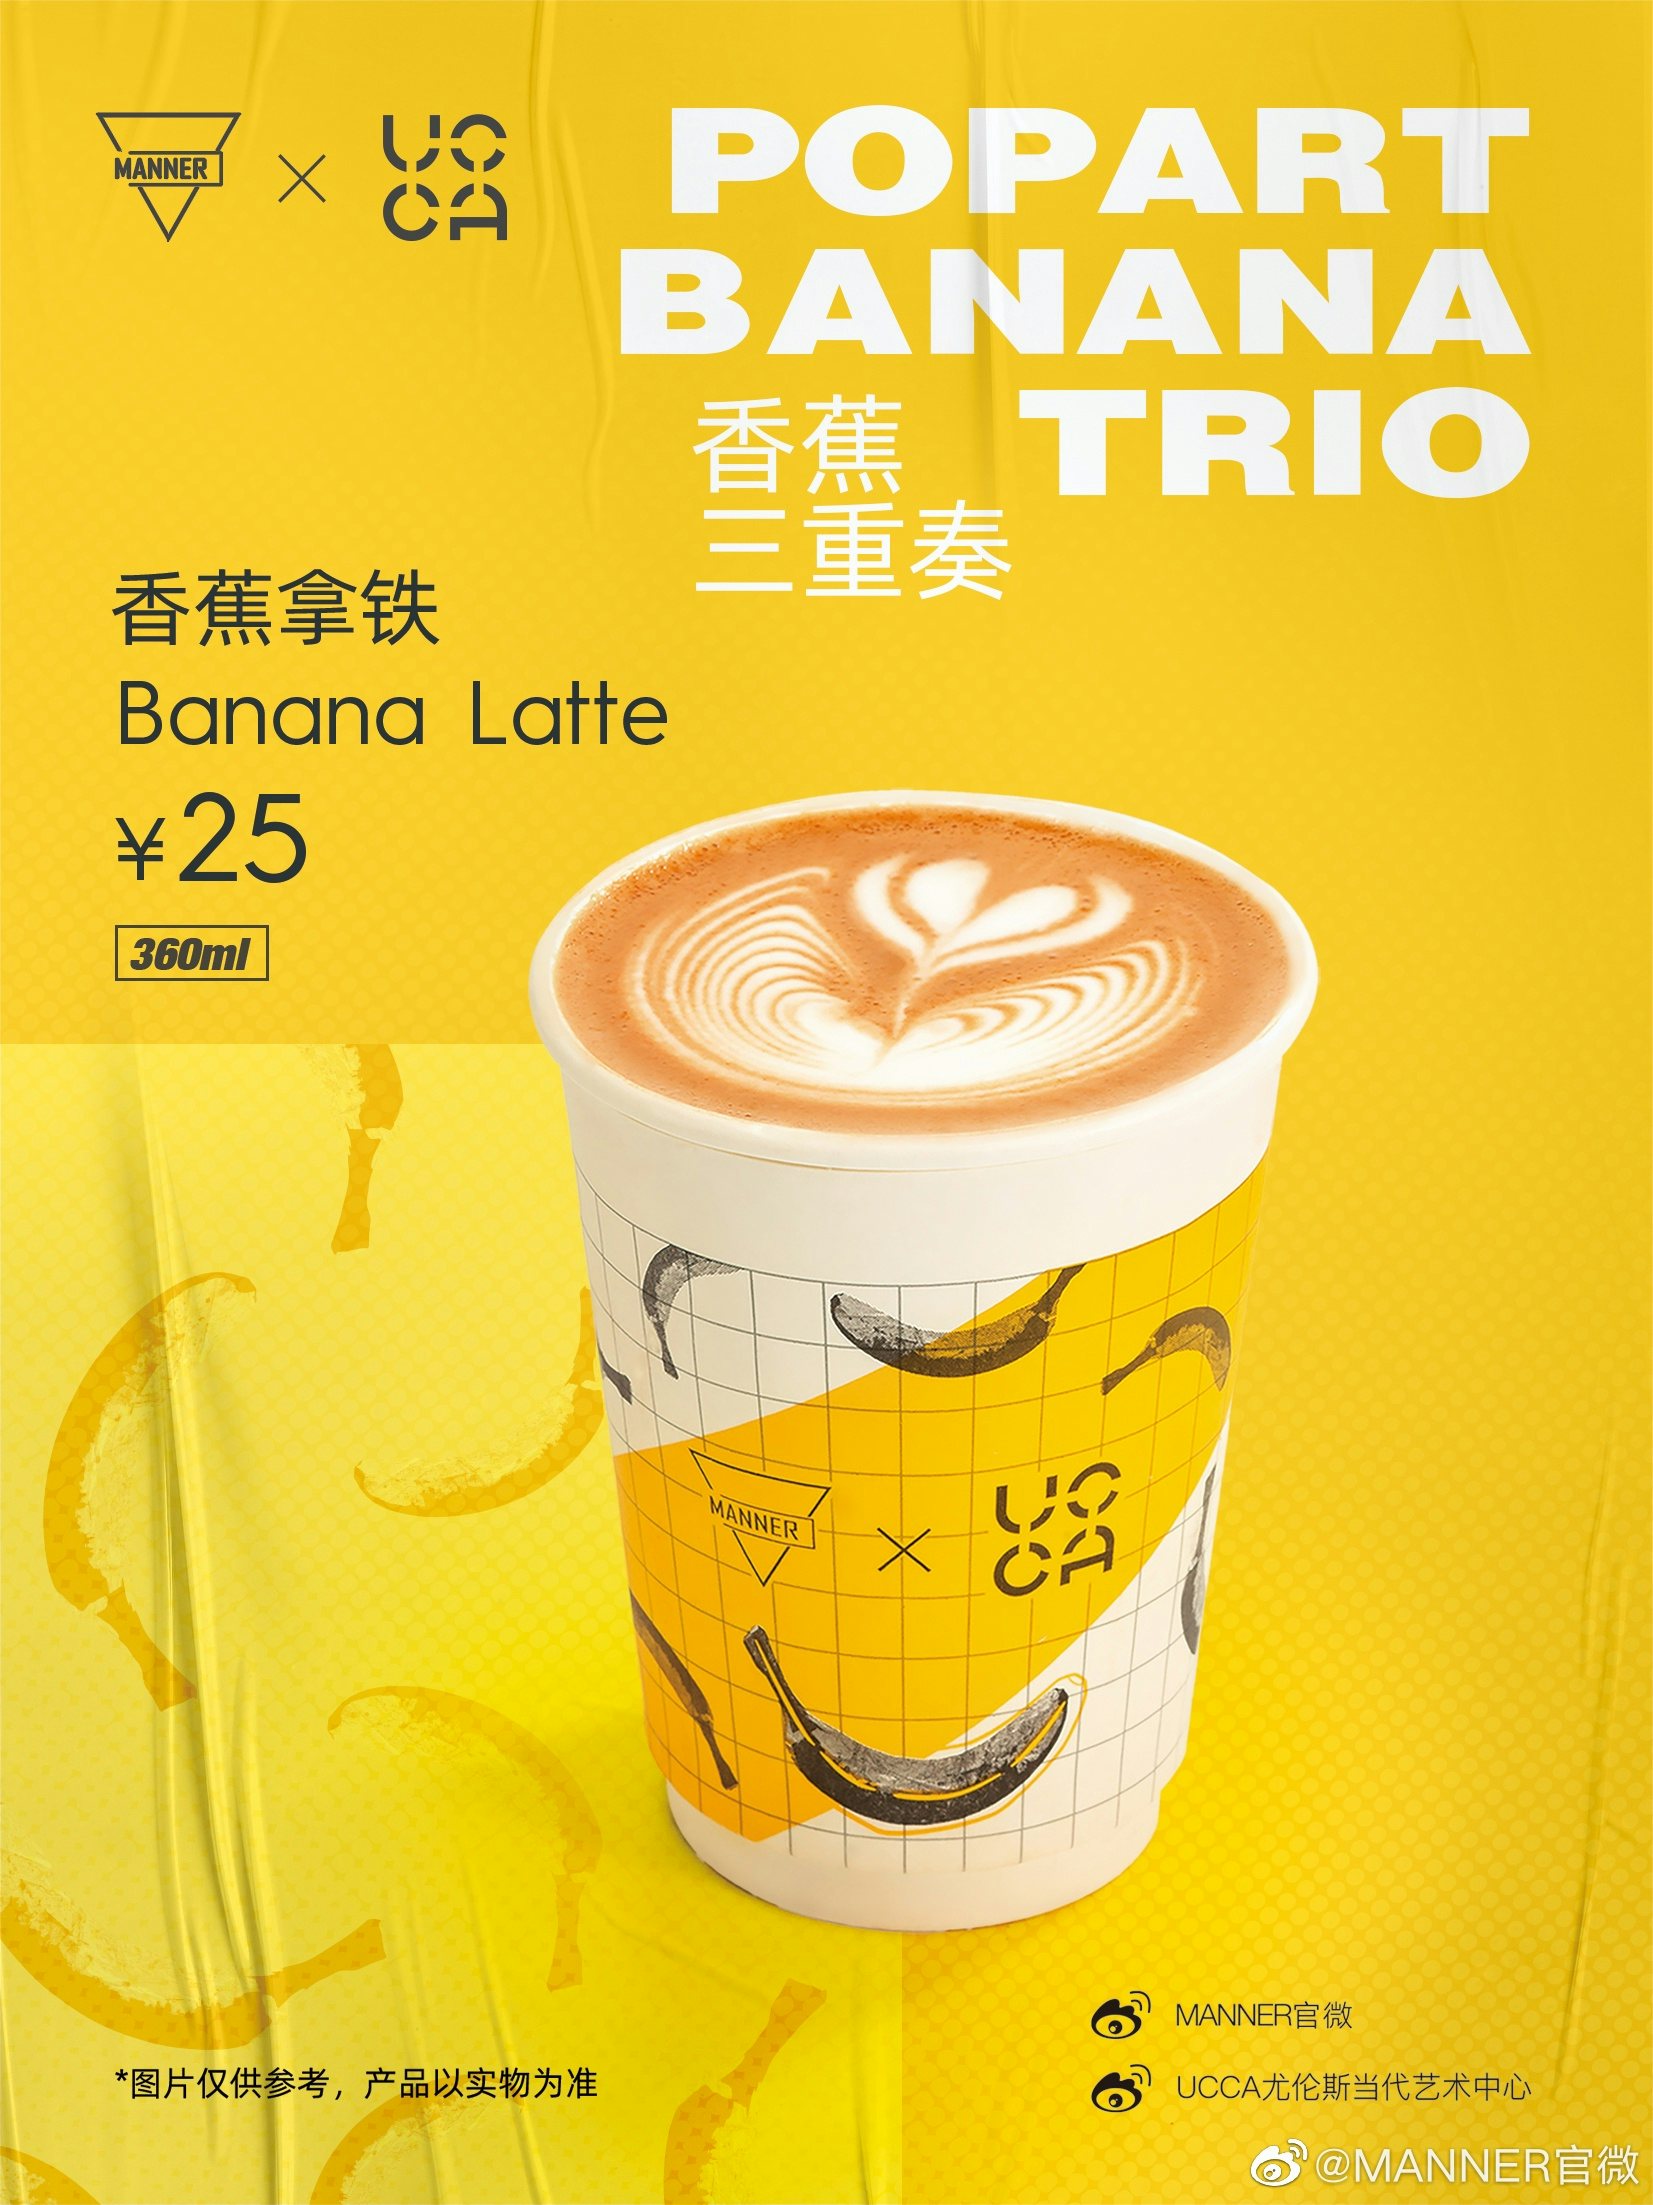 Manner Coffee's Banana Latte collab with UCCA veered into merch territory. Image: Manner Coffee Weibo